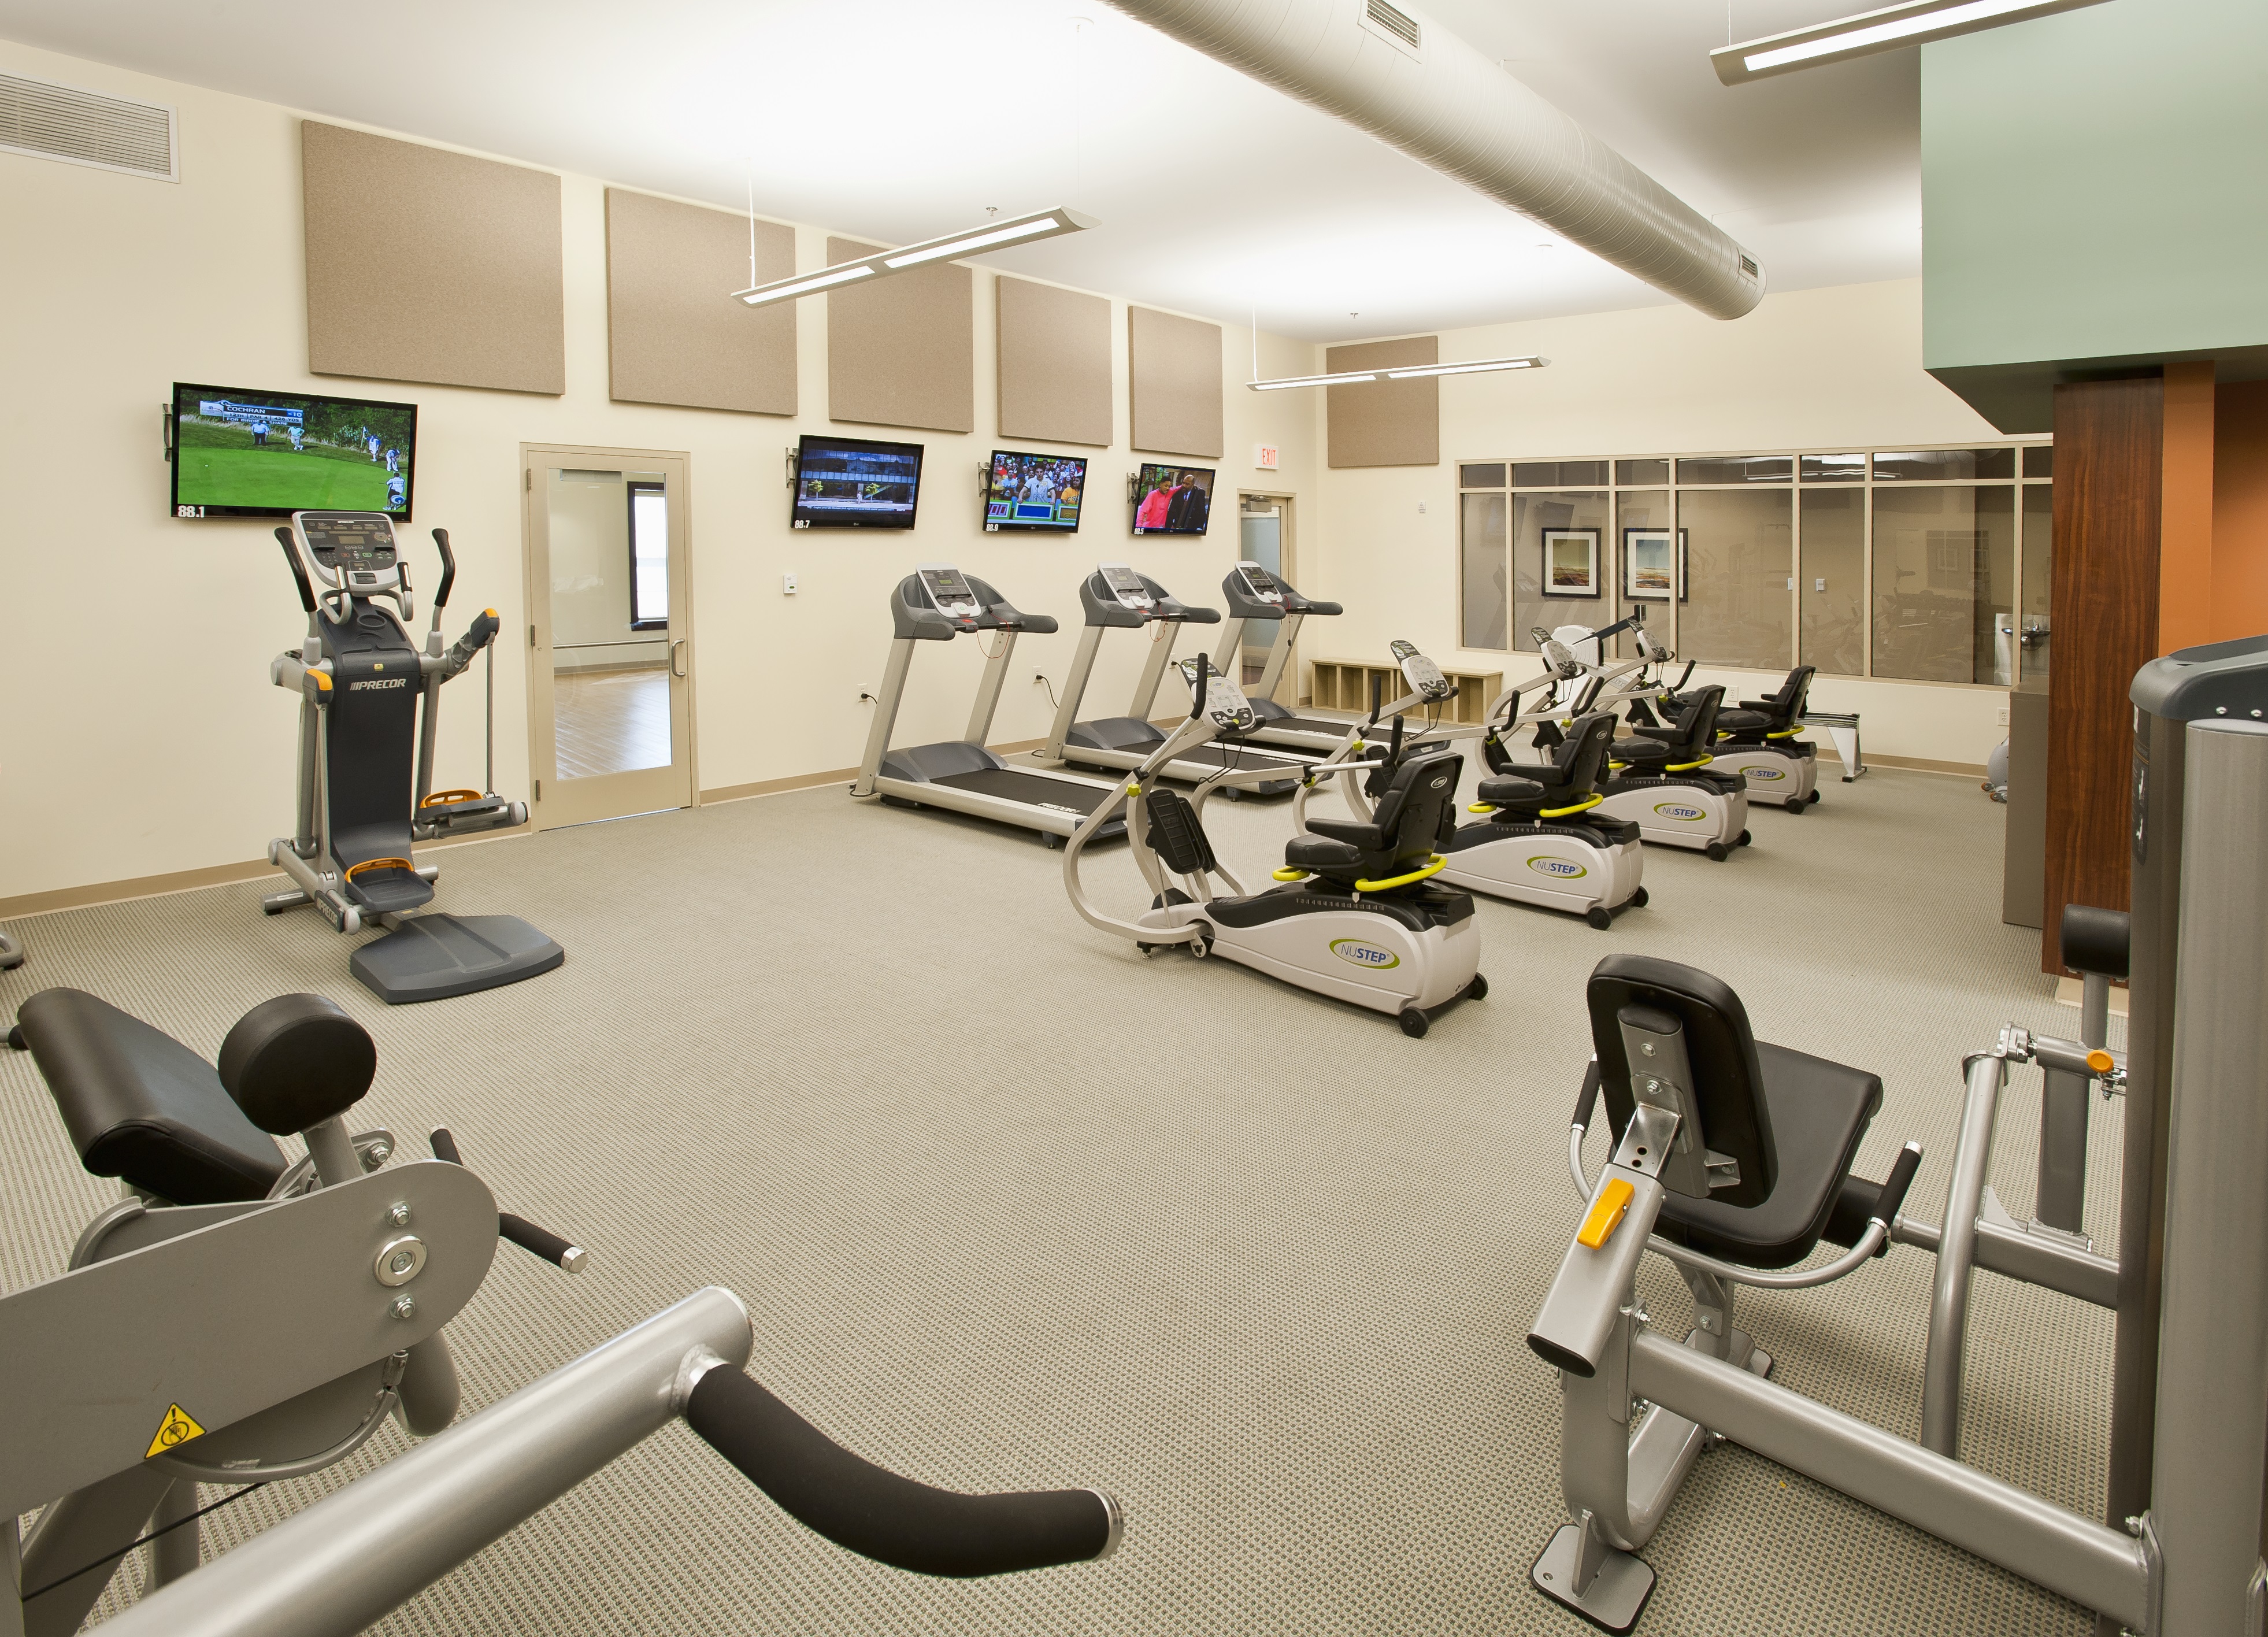 St Leonard workout facility with stair stepper, treadmills, sitting bikes, weight press, water, and much more 